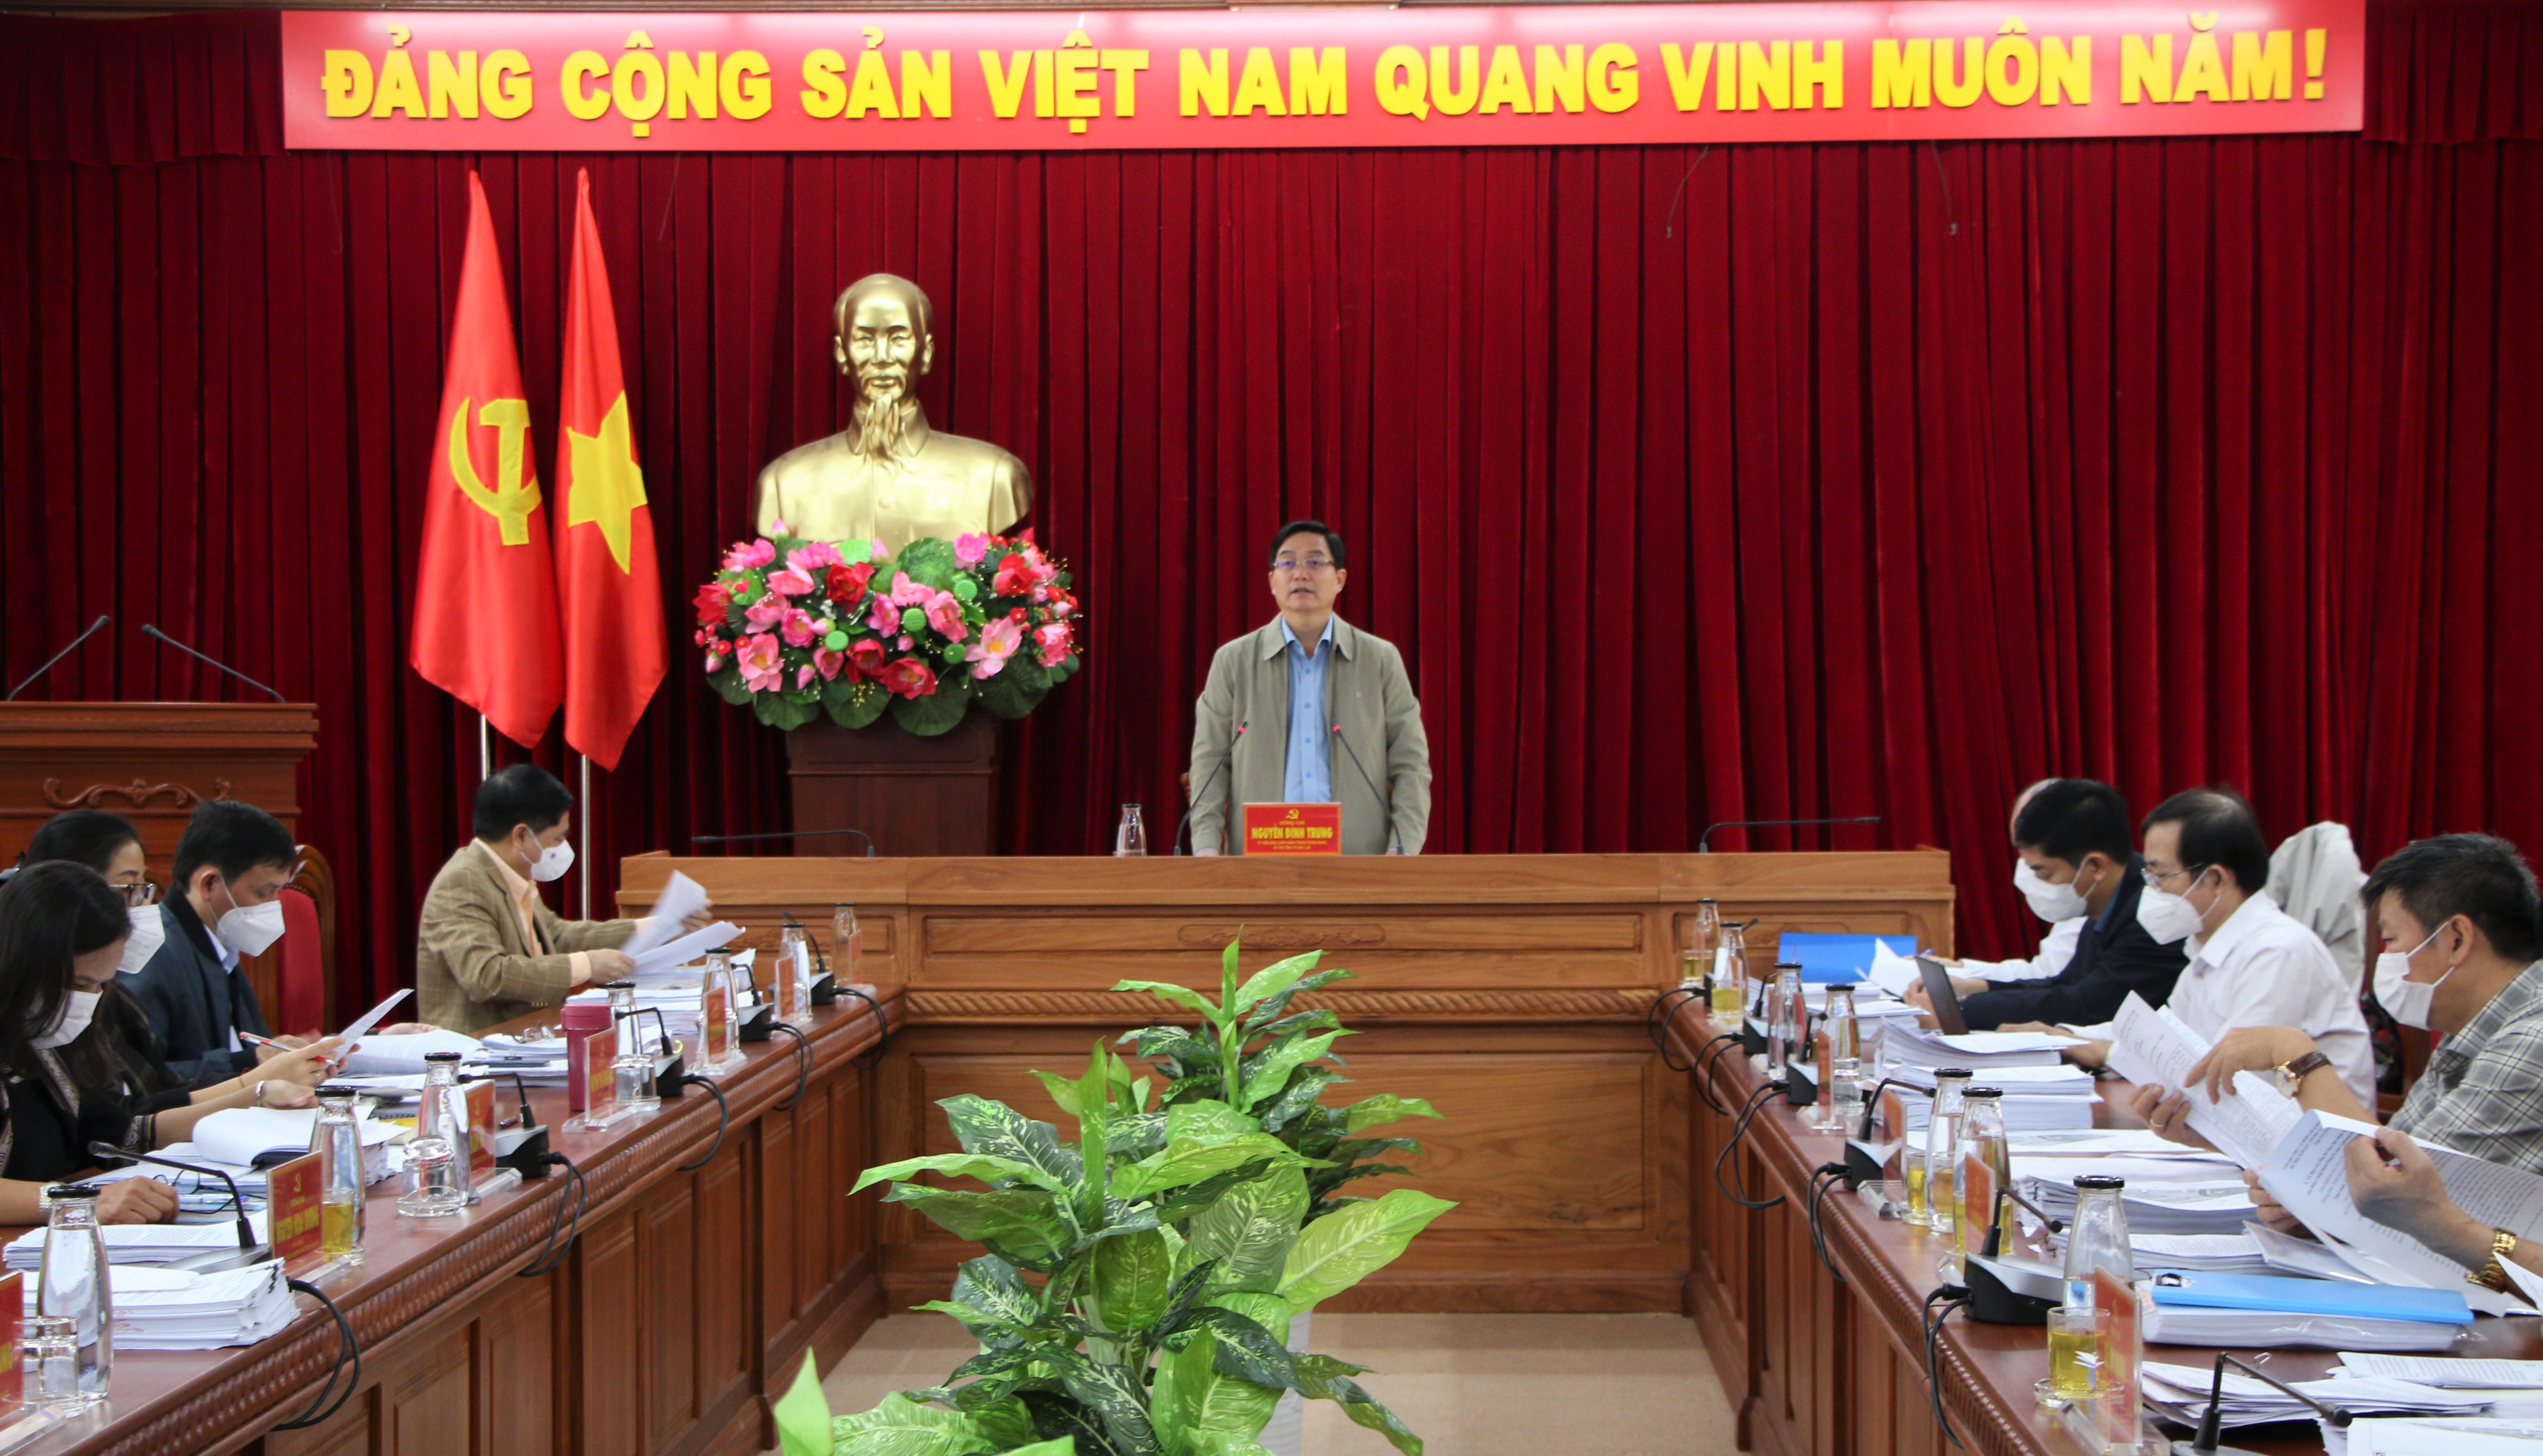 The 31st Provincial Party Standing Committee Conference